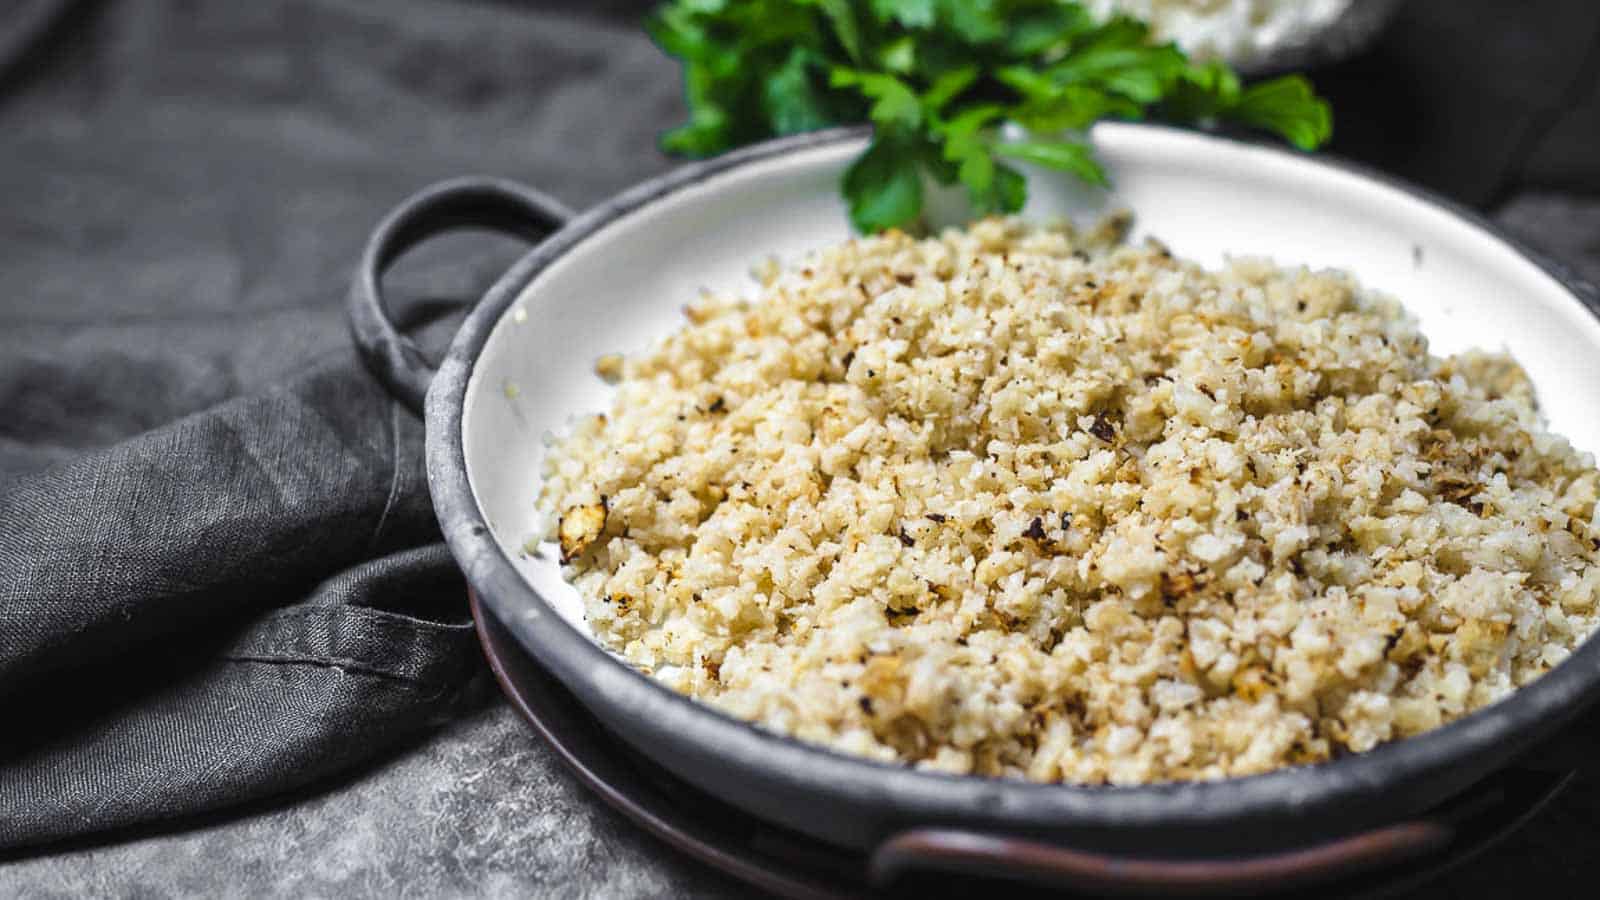 Frozen Cauliflower Rice baked and served on a plate.